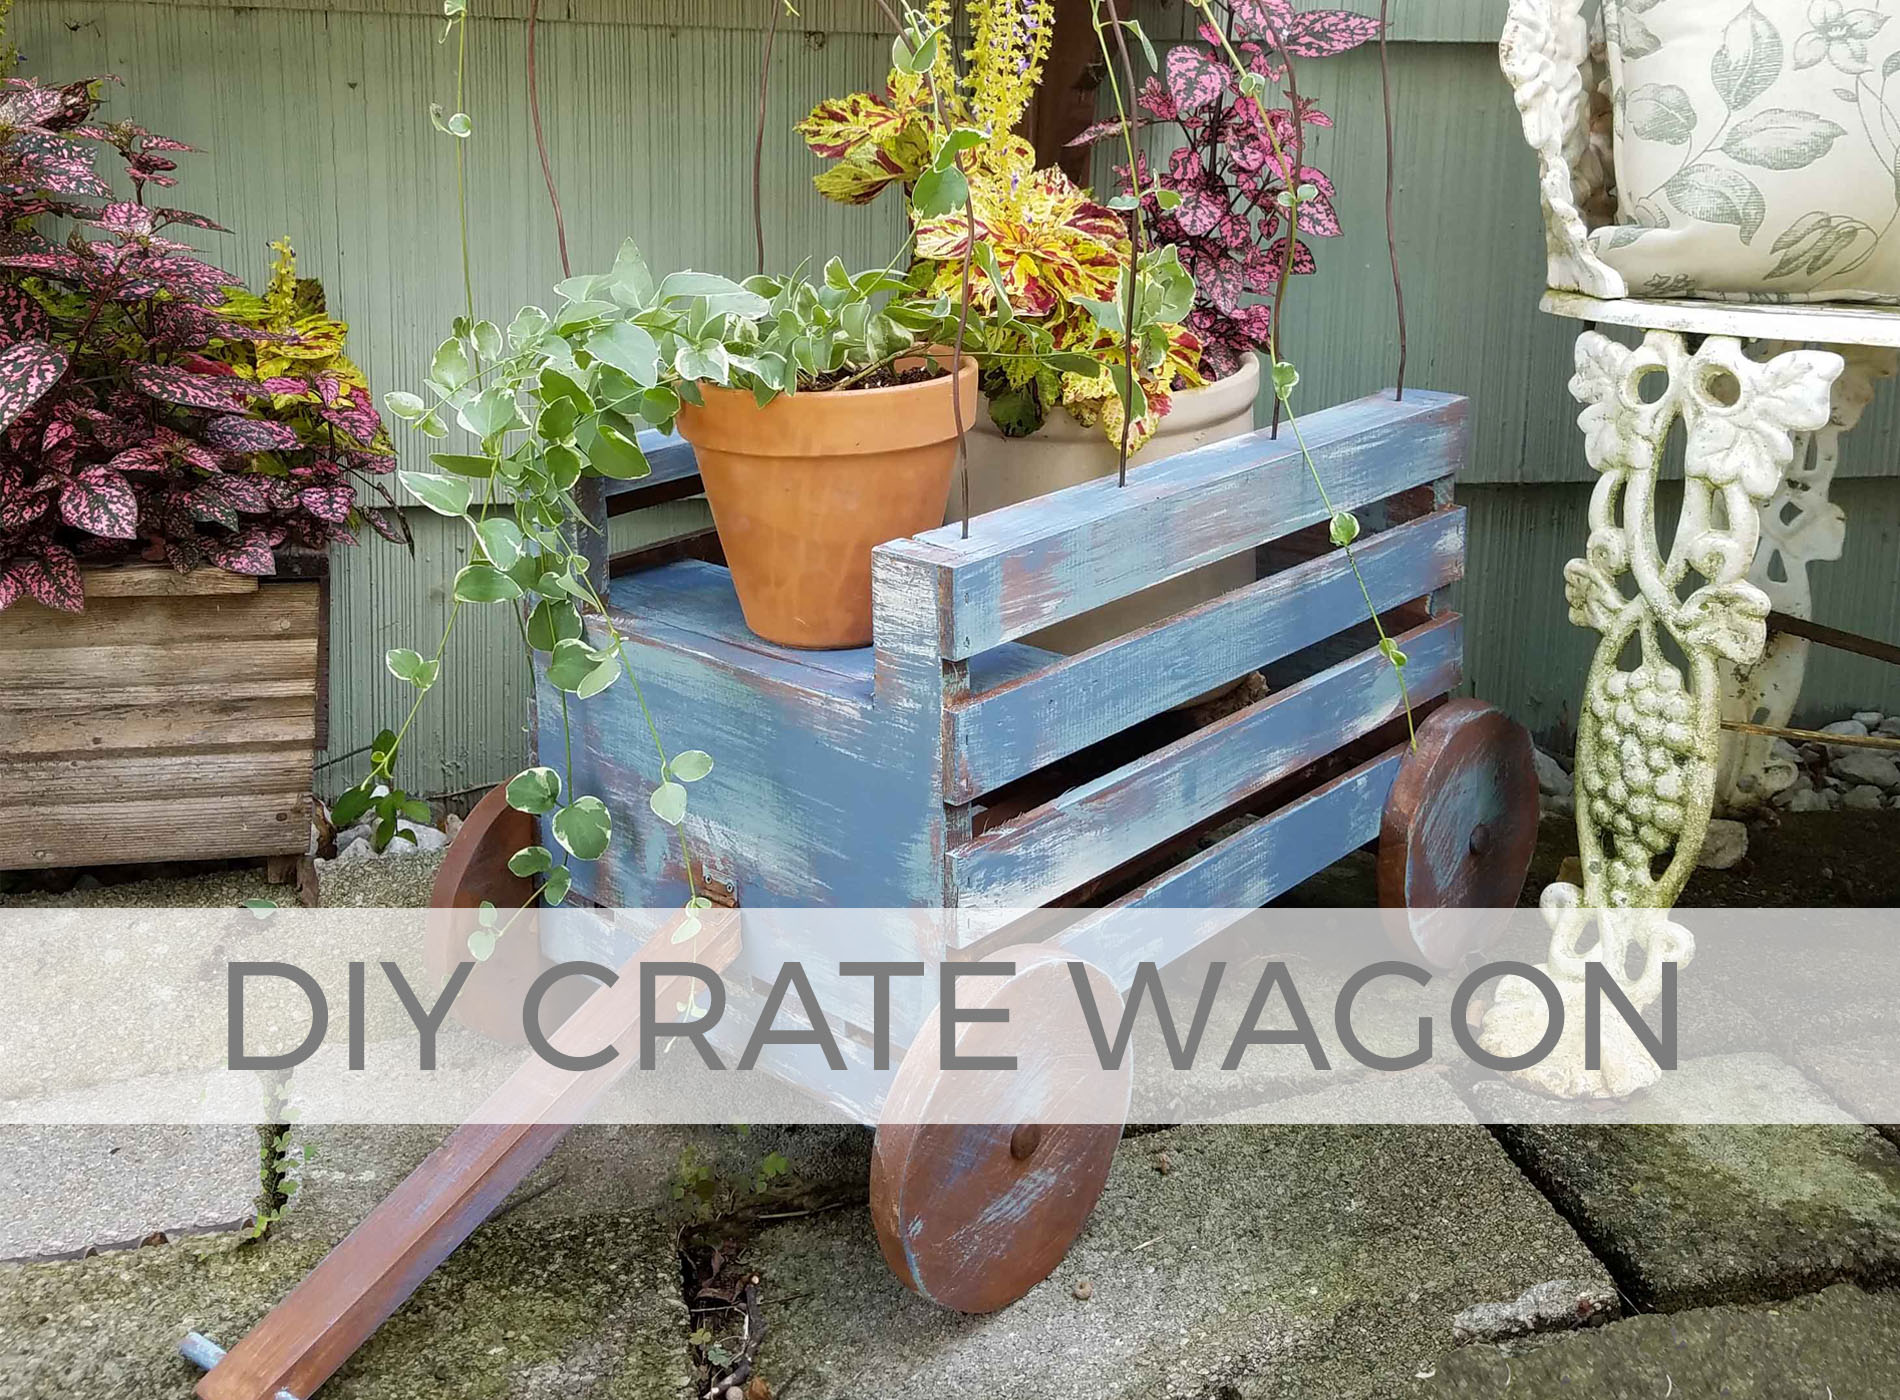 Perfect for any season, this DIY crate wagon is adorable! Free plans by Larissa of Prodigal Pieces | prodigalpieces.com #prodigalpieces